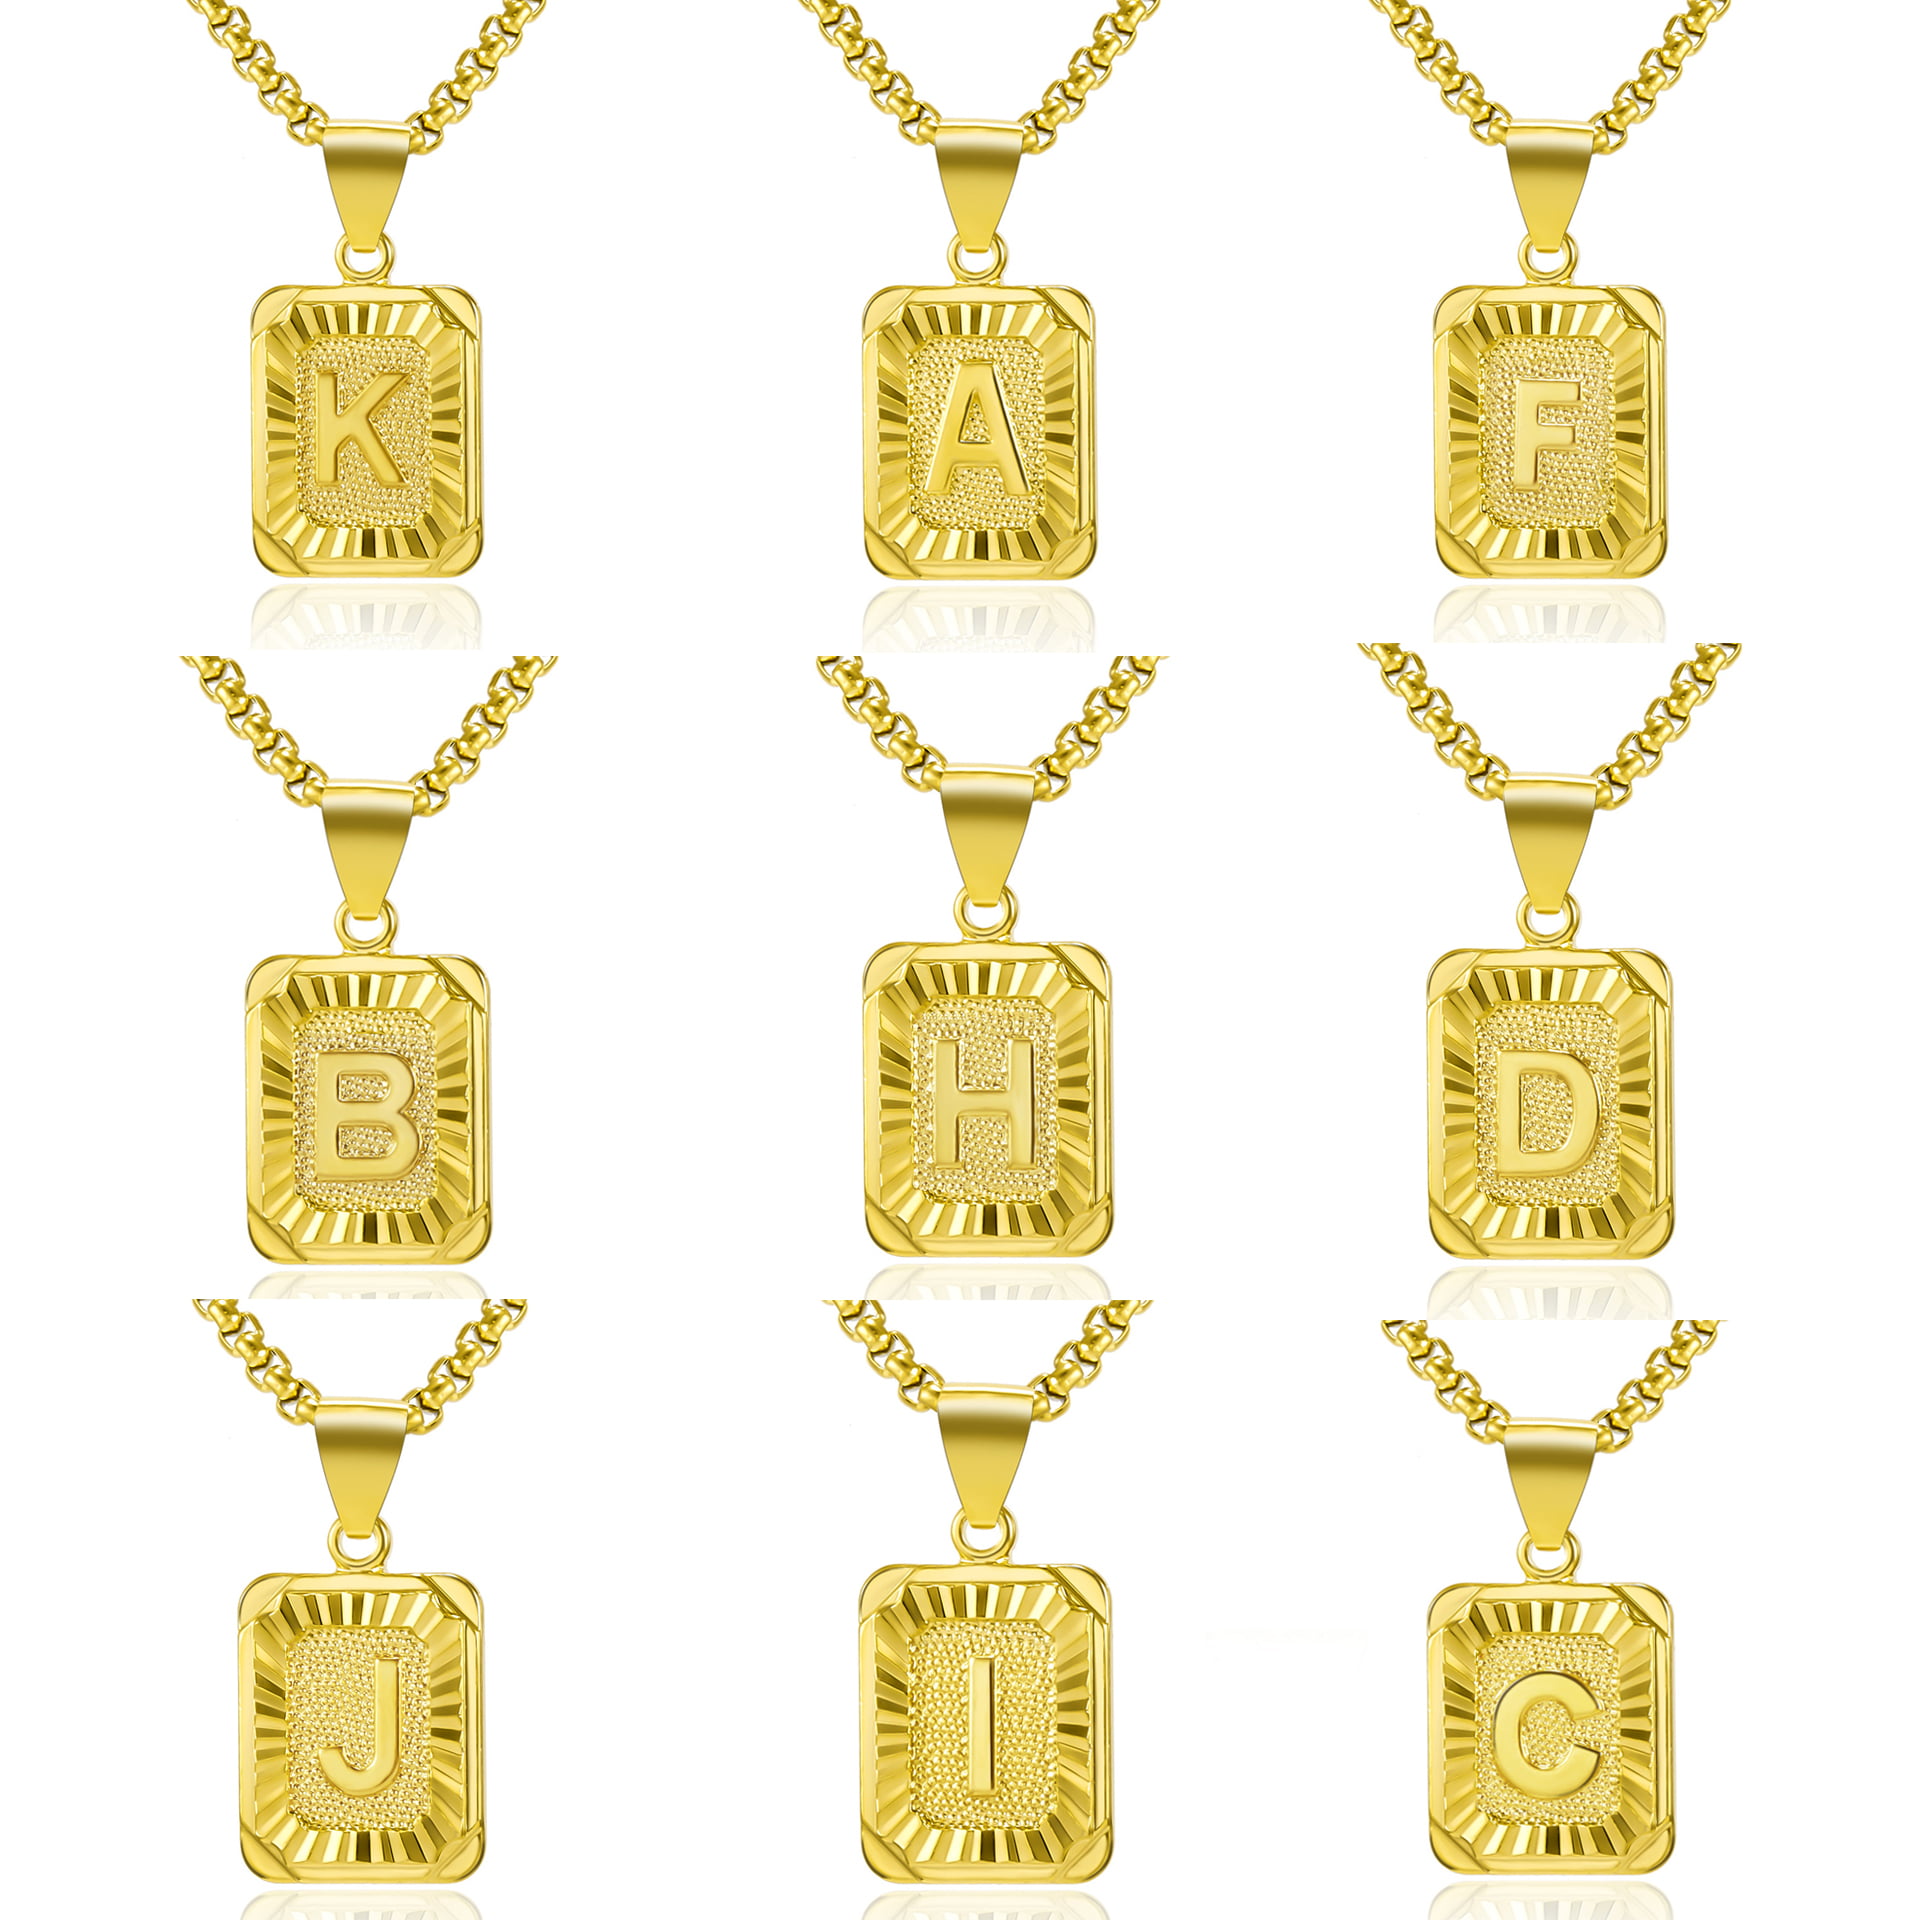 Hermah 26 Gold Plated Square Capital Initial Letter Charm Pendant Necklace for Men Women Box Steel Chain 22inch 